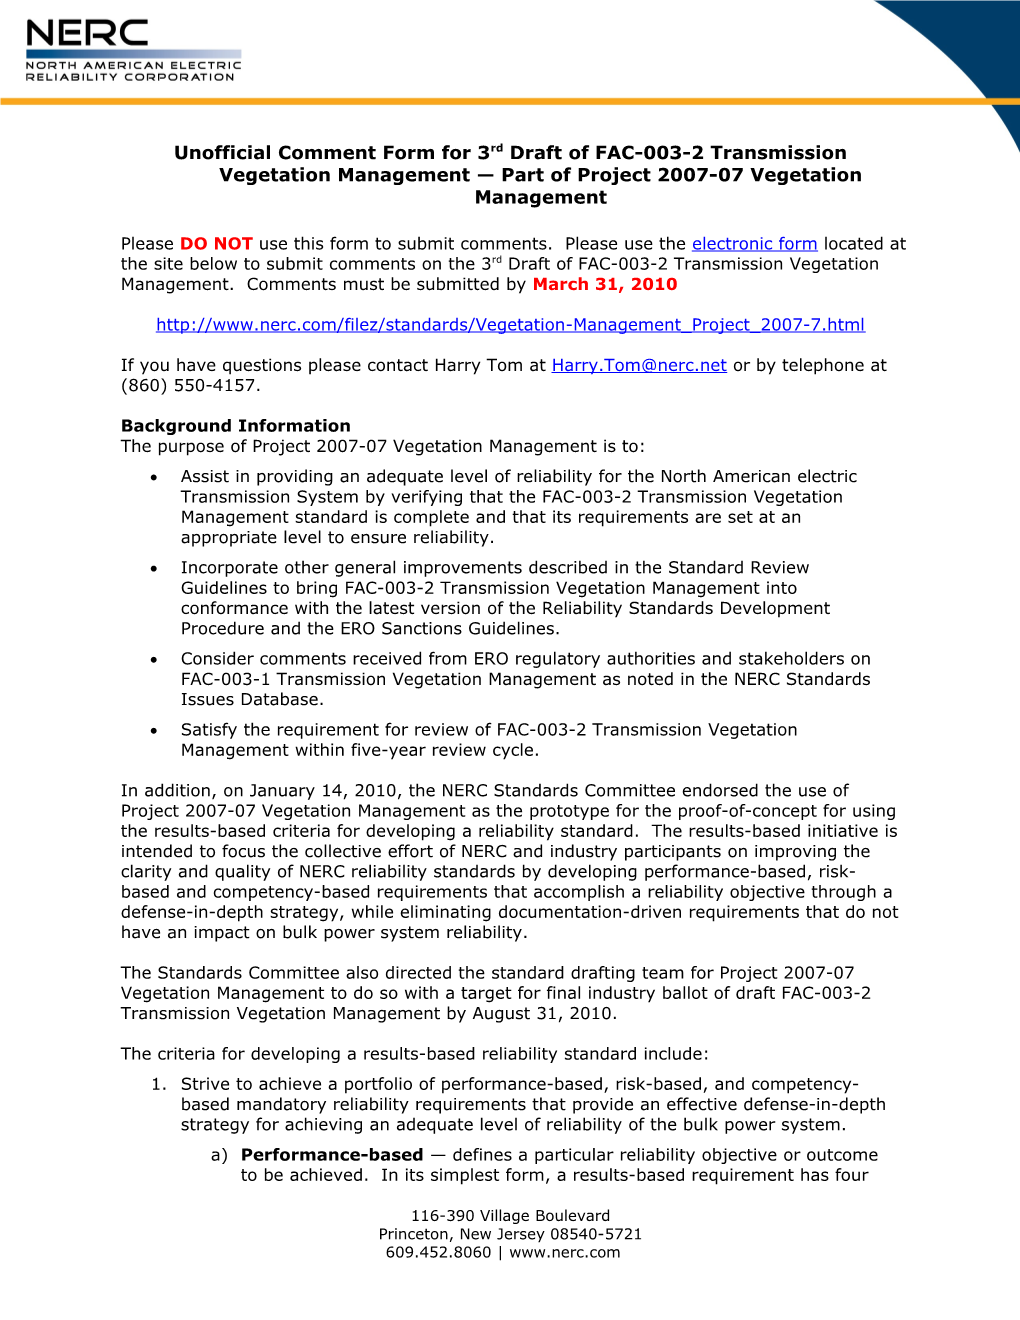 Unofficial Comment Form for 3Rddraft of FAC-003-2 Project 2007-07 Vegetation Management